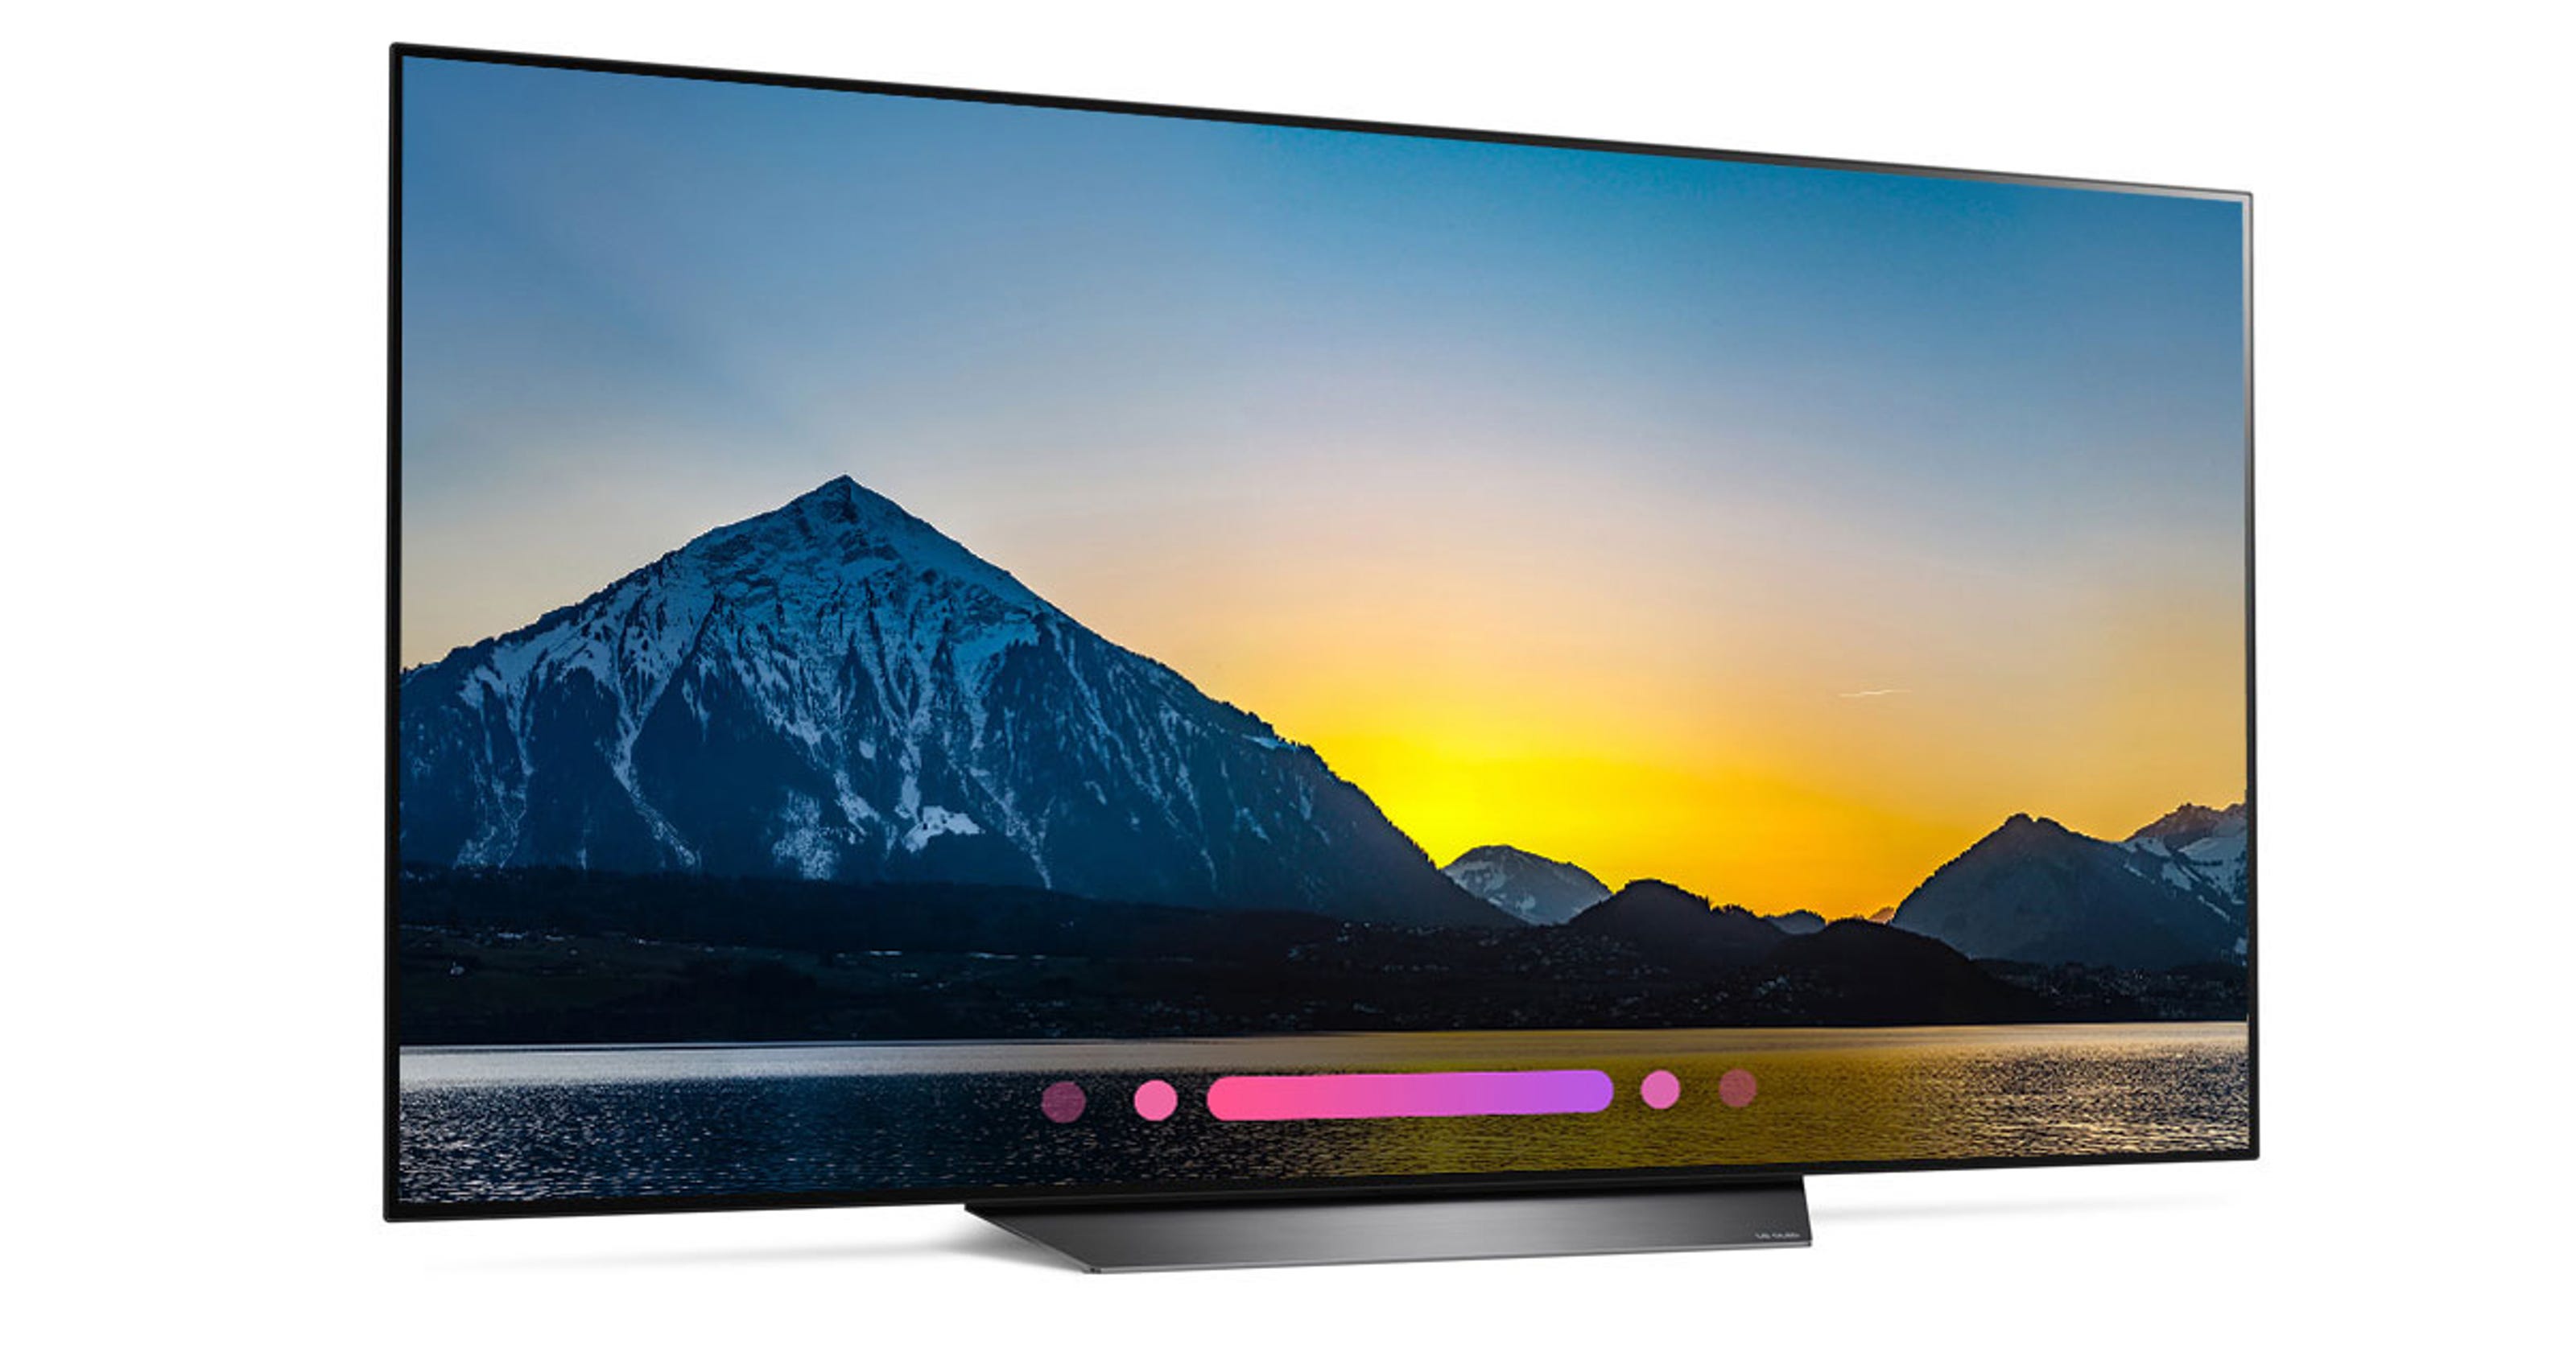 This amazing OLED TV is at its lowest price—for now